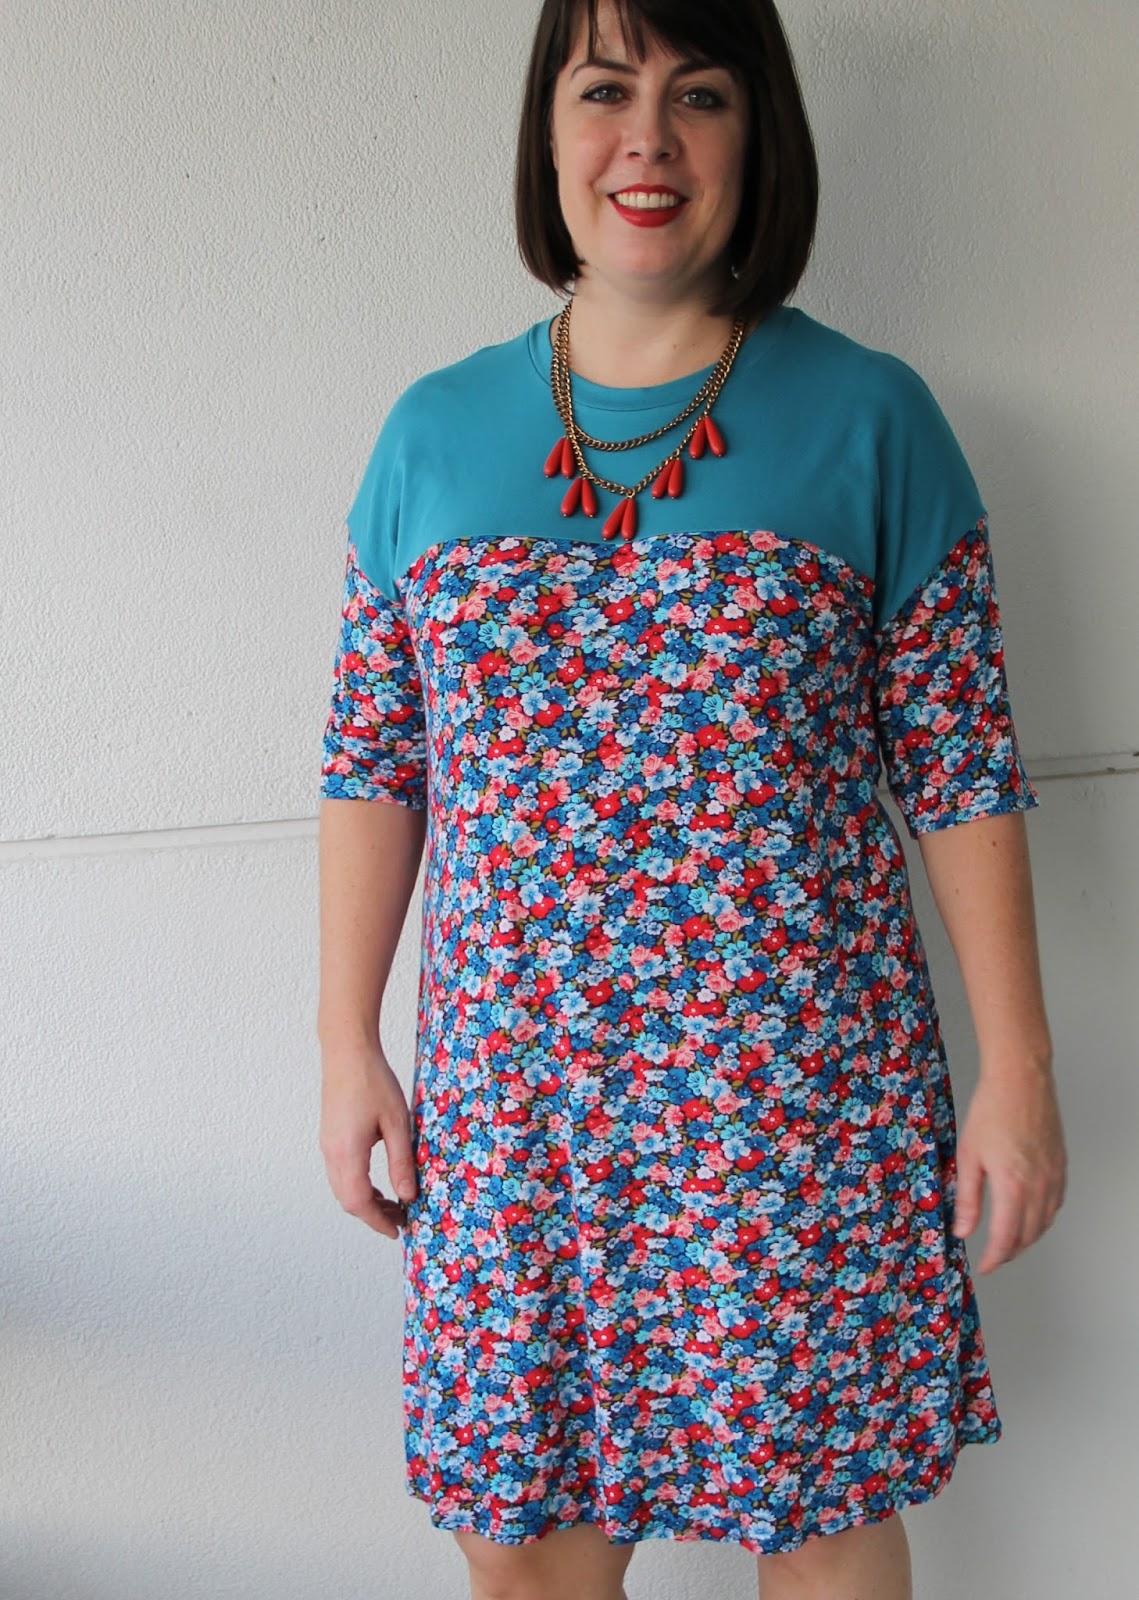 Cookin' & Craftin': Floral Colorblocked Marianne Dress